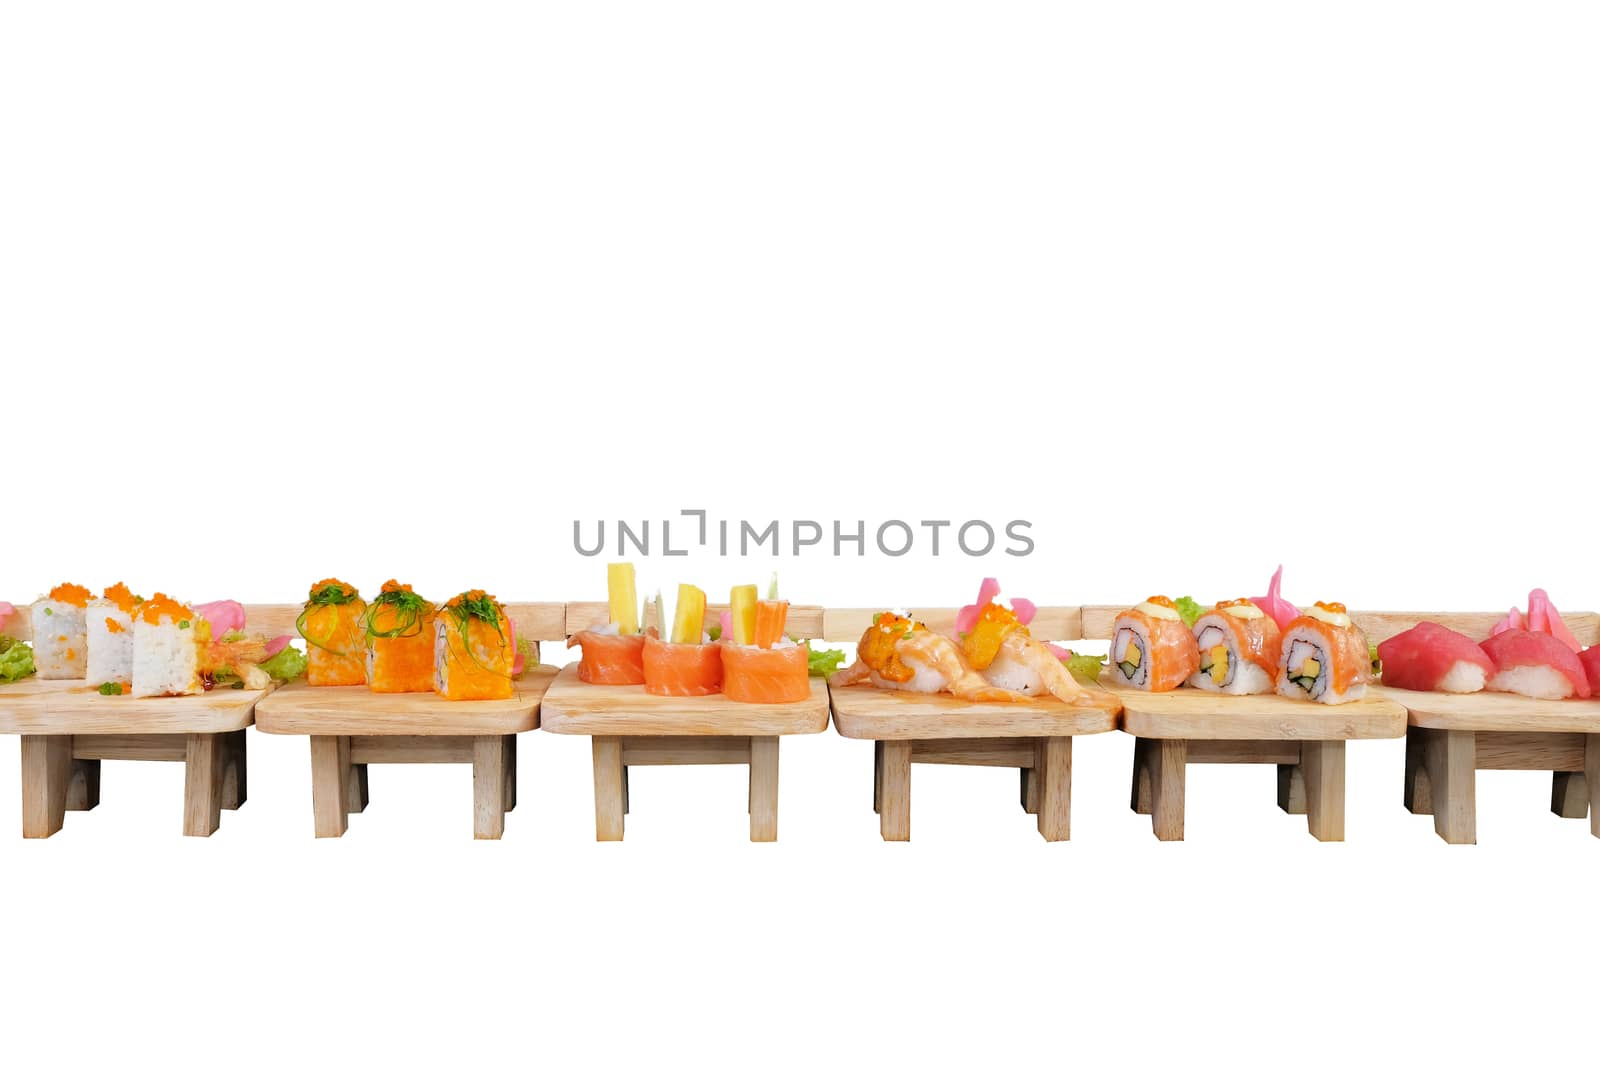 Japanese Cuisine - Sushi Roll on wood plate in white background